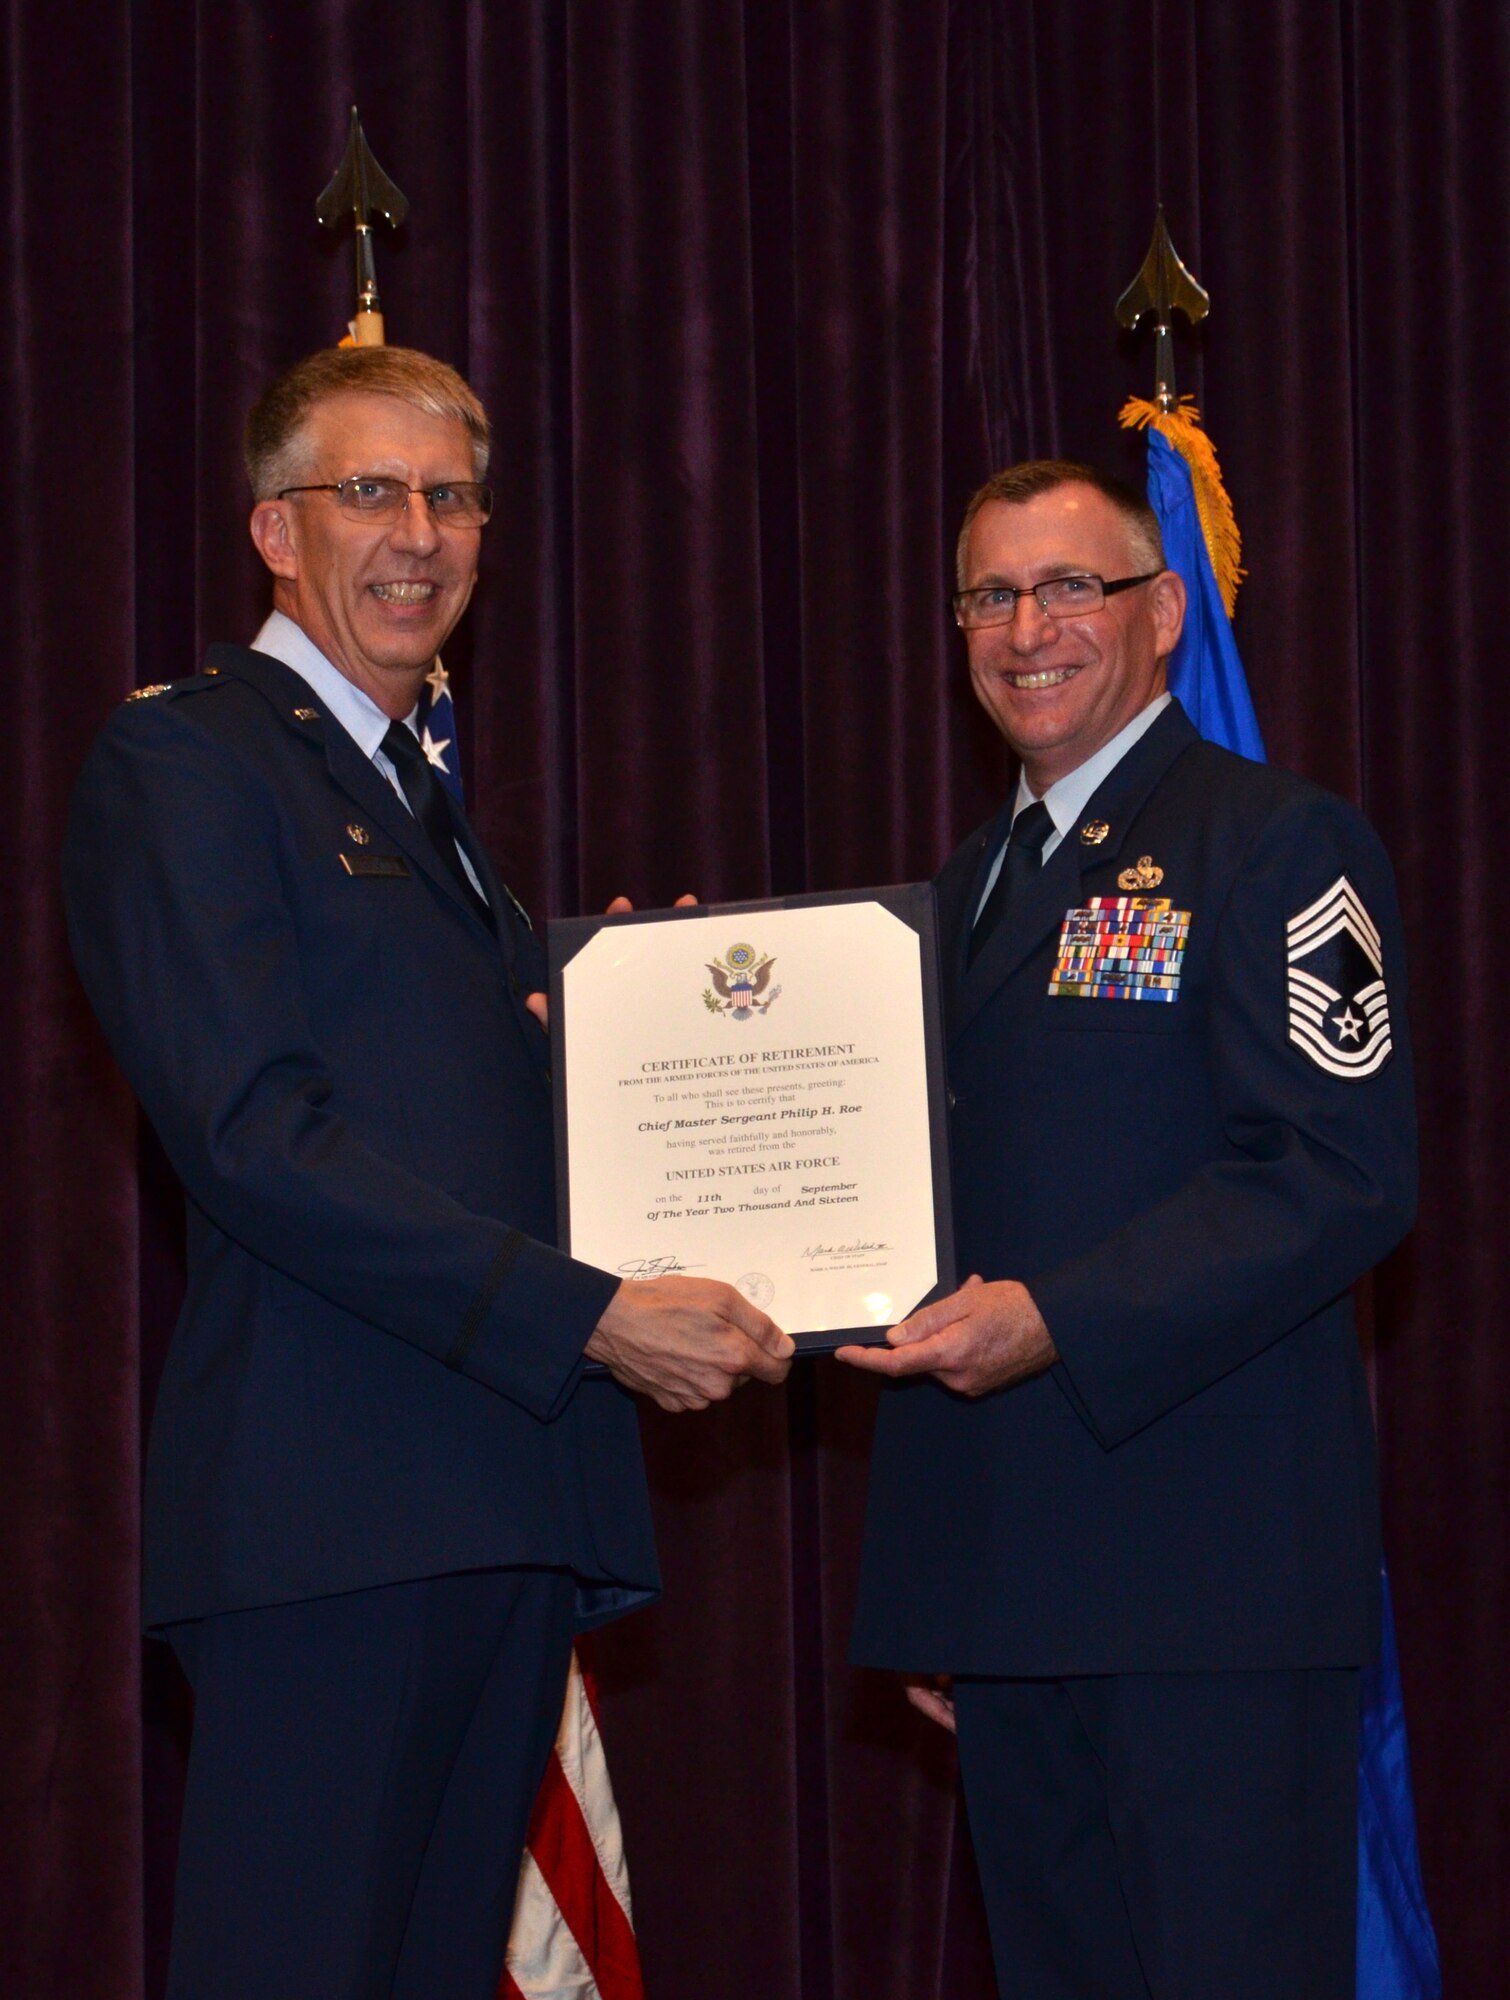 Col. Jeffrey Macrander, 920th Rescue Wing commander (left), presents a certificate of retirement to Chief Master Sgt. Philip Roe, 920th Aircraft Maintenance Squadron chief enlisted manager and superintendent, Sept. 10, 2016 at Patrick Air Force Base, Fla. Roe served in the Air Force for 36 years, the majority of which was spent with the 920th Rescue Wing. (U.S. Air Force photo by 1st Lt. Anna-Marie Wyant)